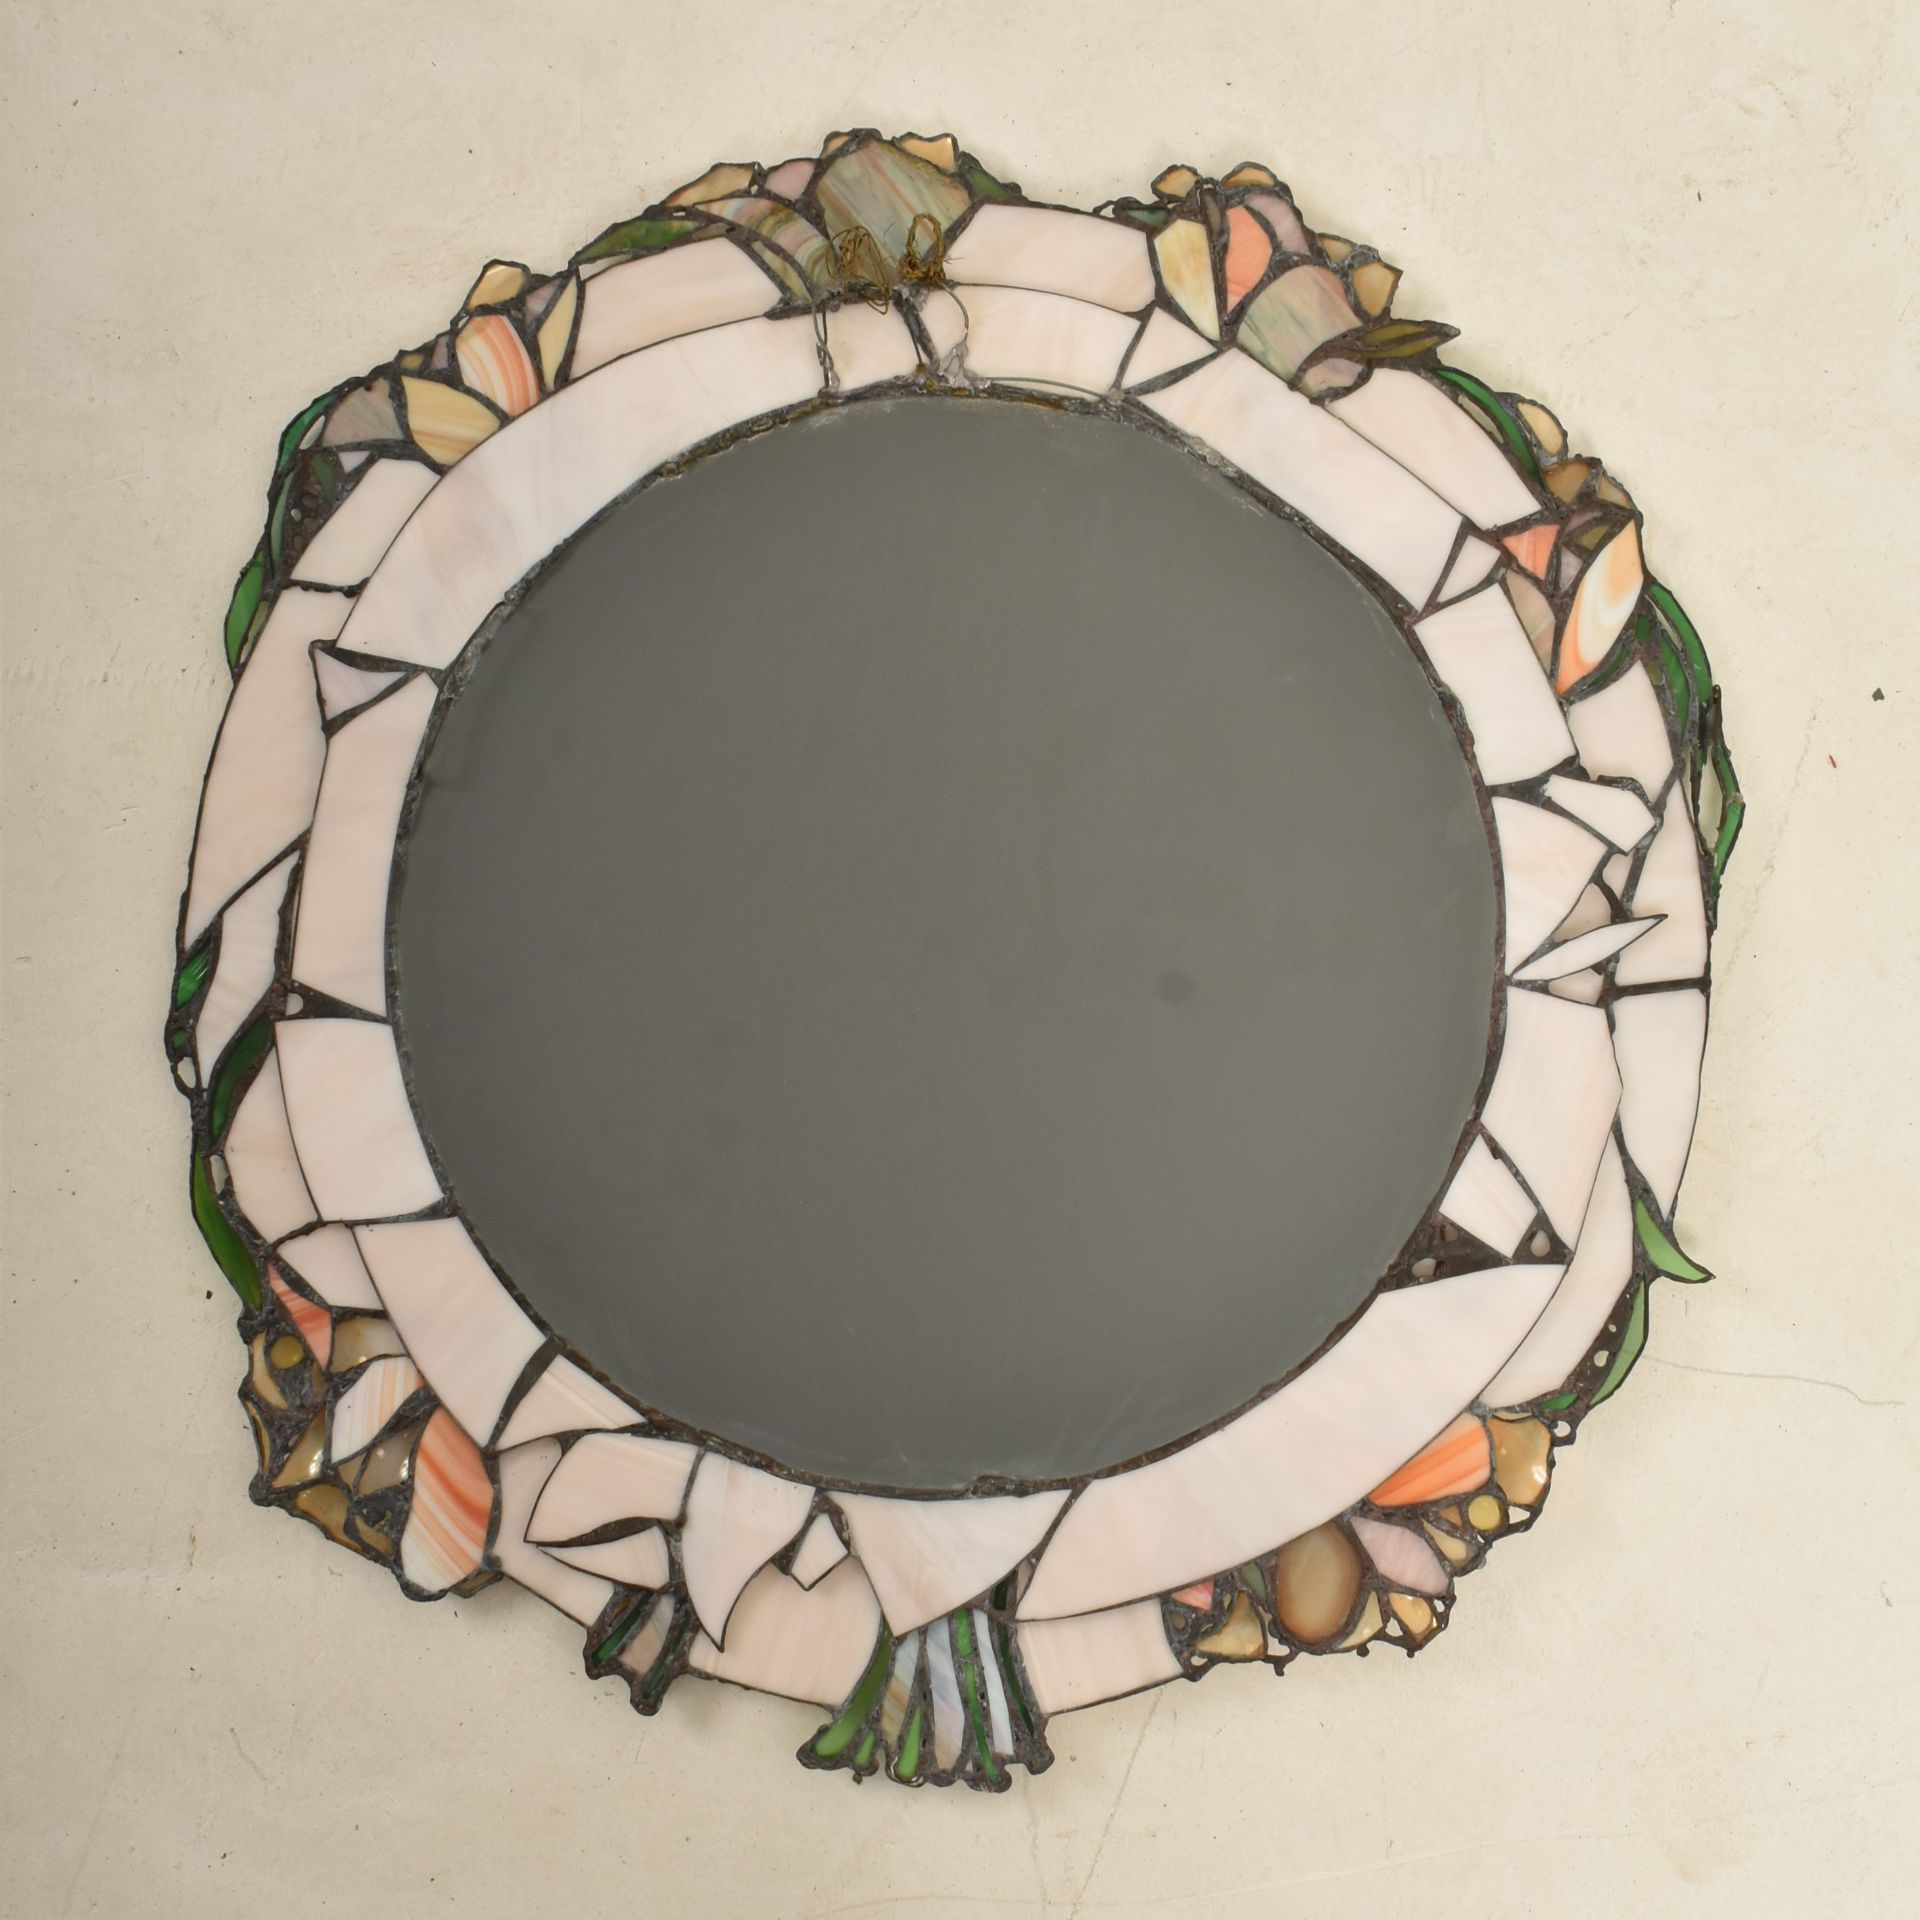 JOHN LEATHWOOD, HULL - CIRCULAR STAINED LEADED GLASS MIRROR - Image 5 of 5